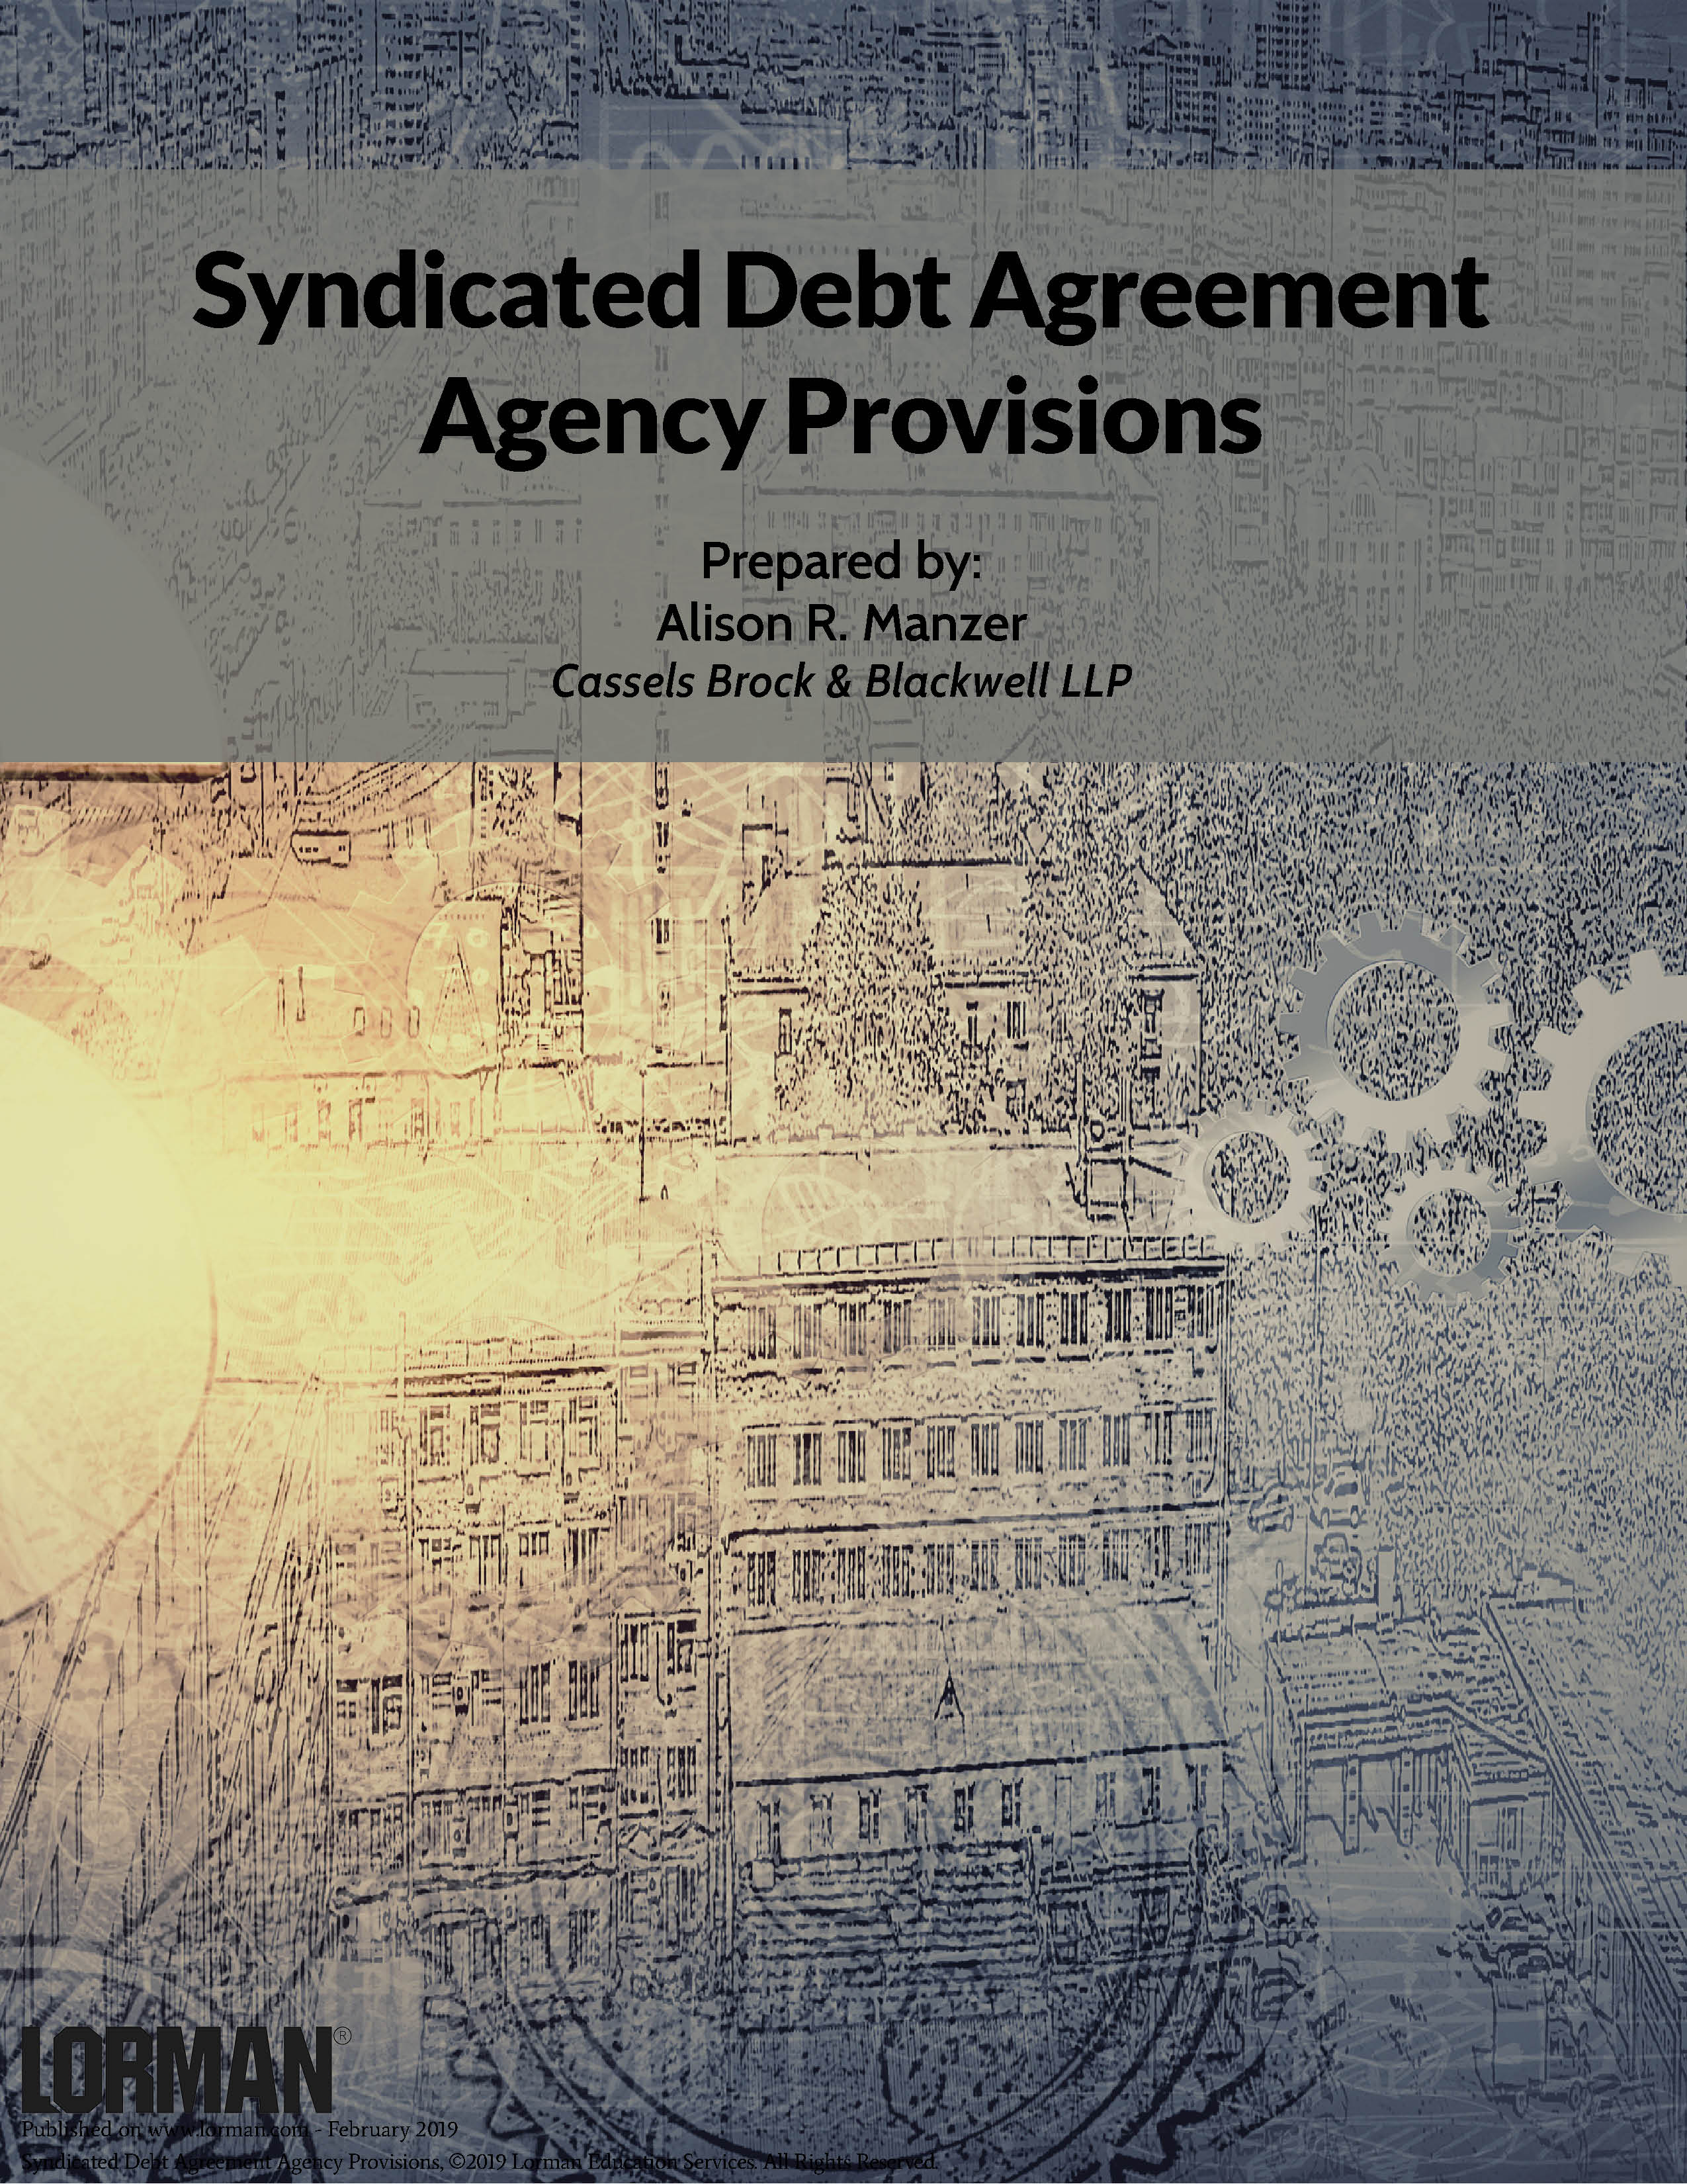 Syndicated Debt Agreement Agency Provisions